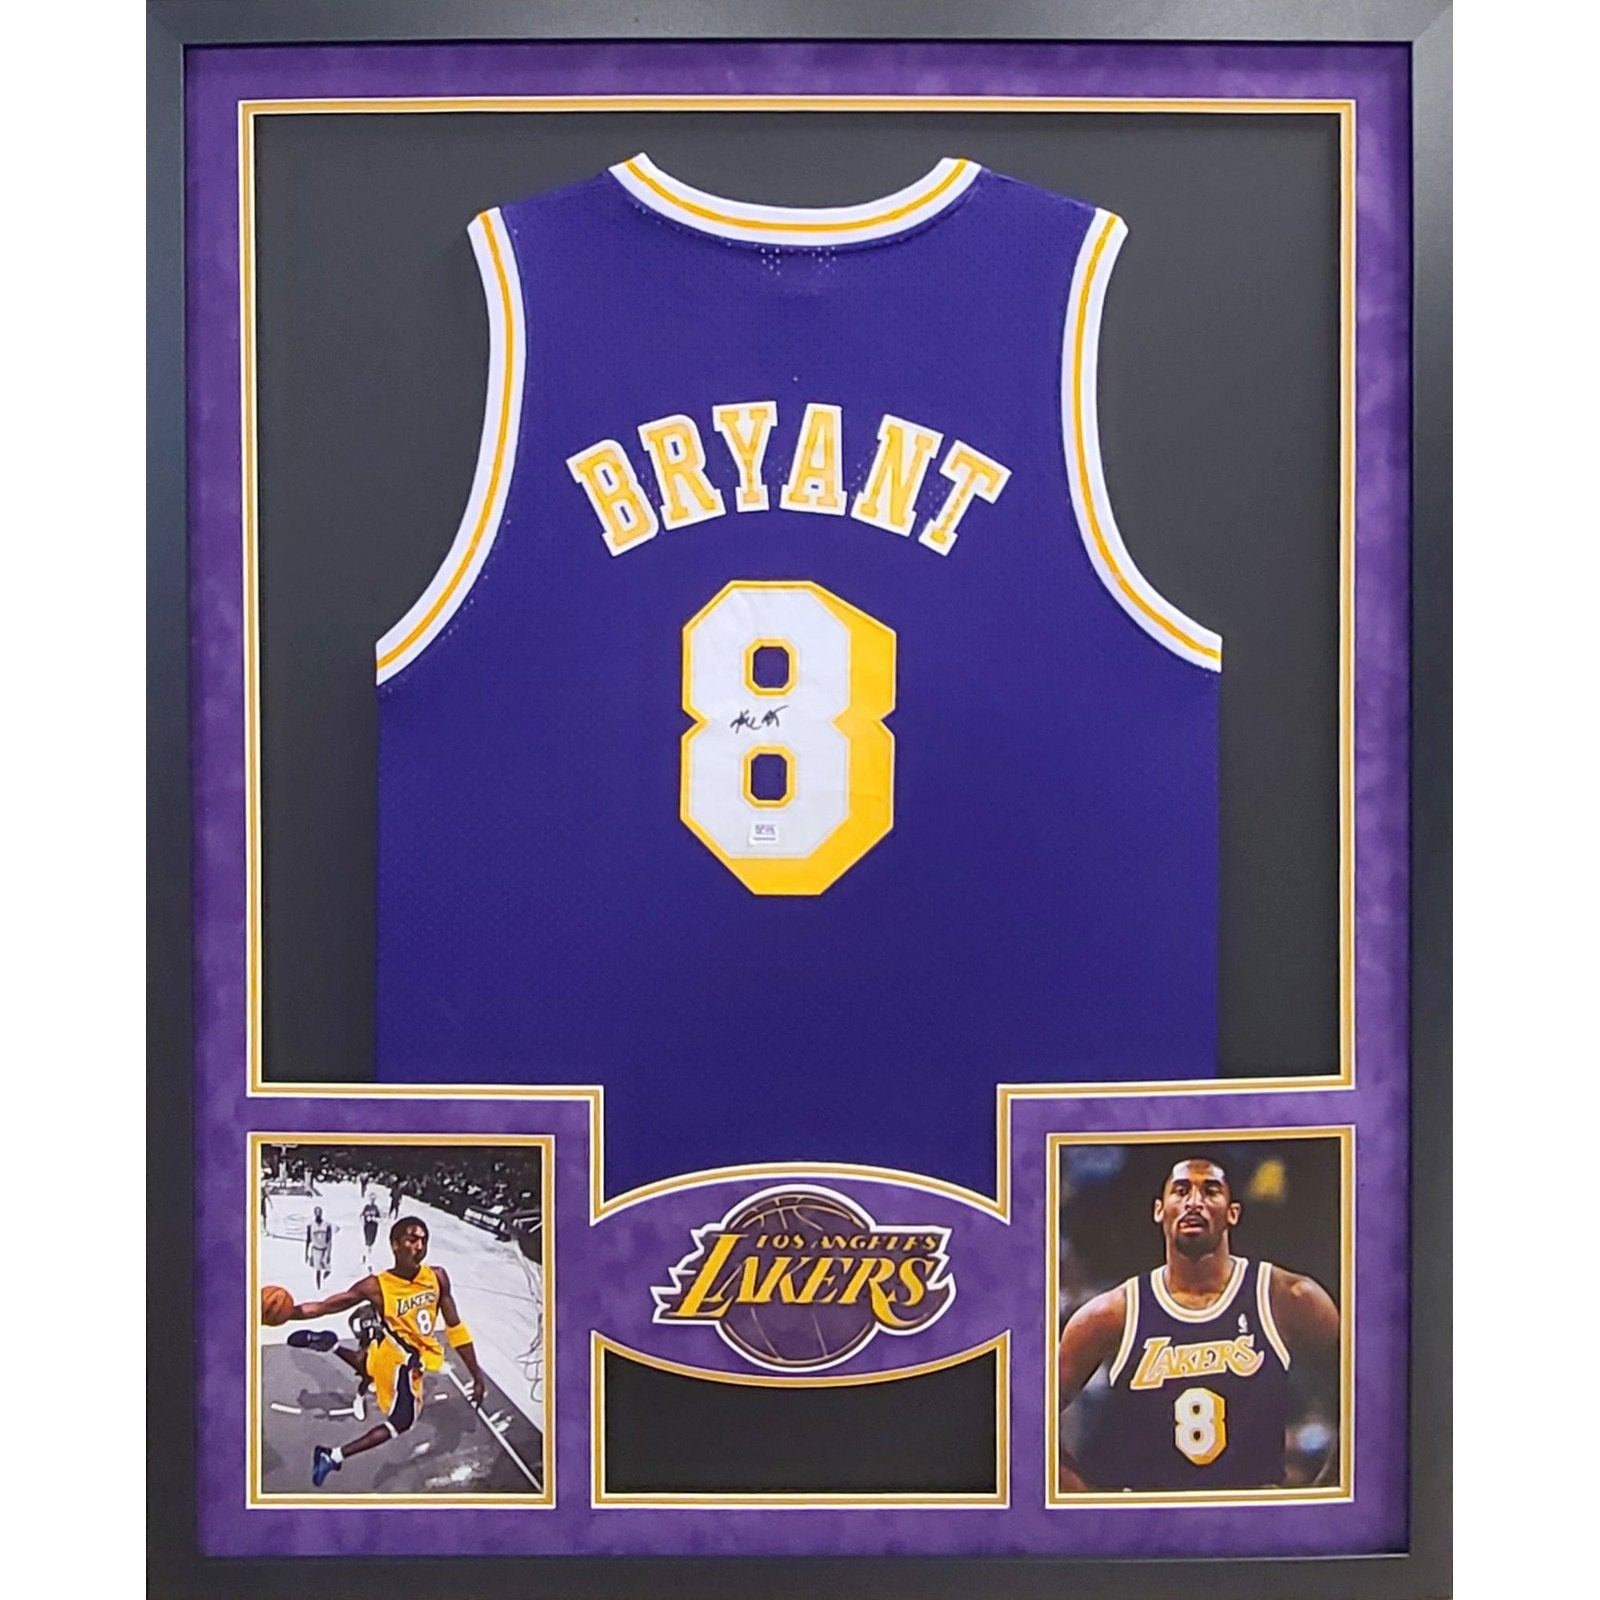 Kobe Bryant Signed Authentic 2009 Finals #24 Los Angeles Lakers Jersey UDA  & JSA